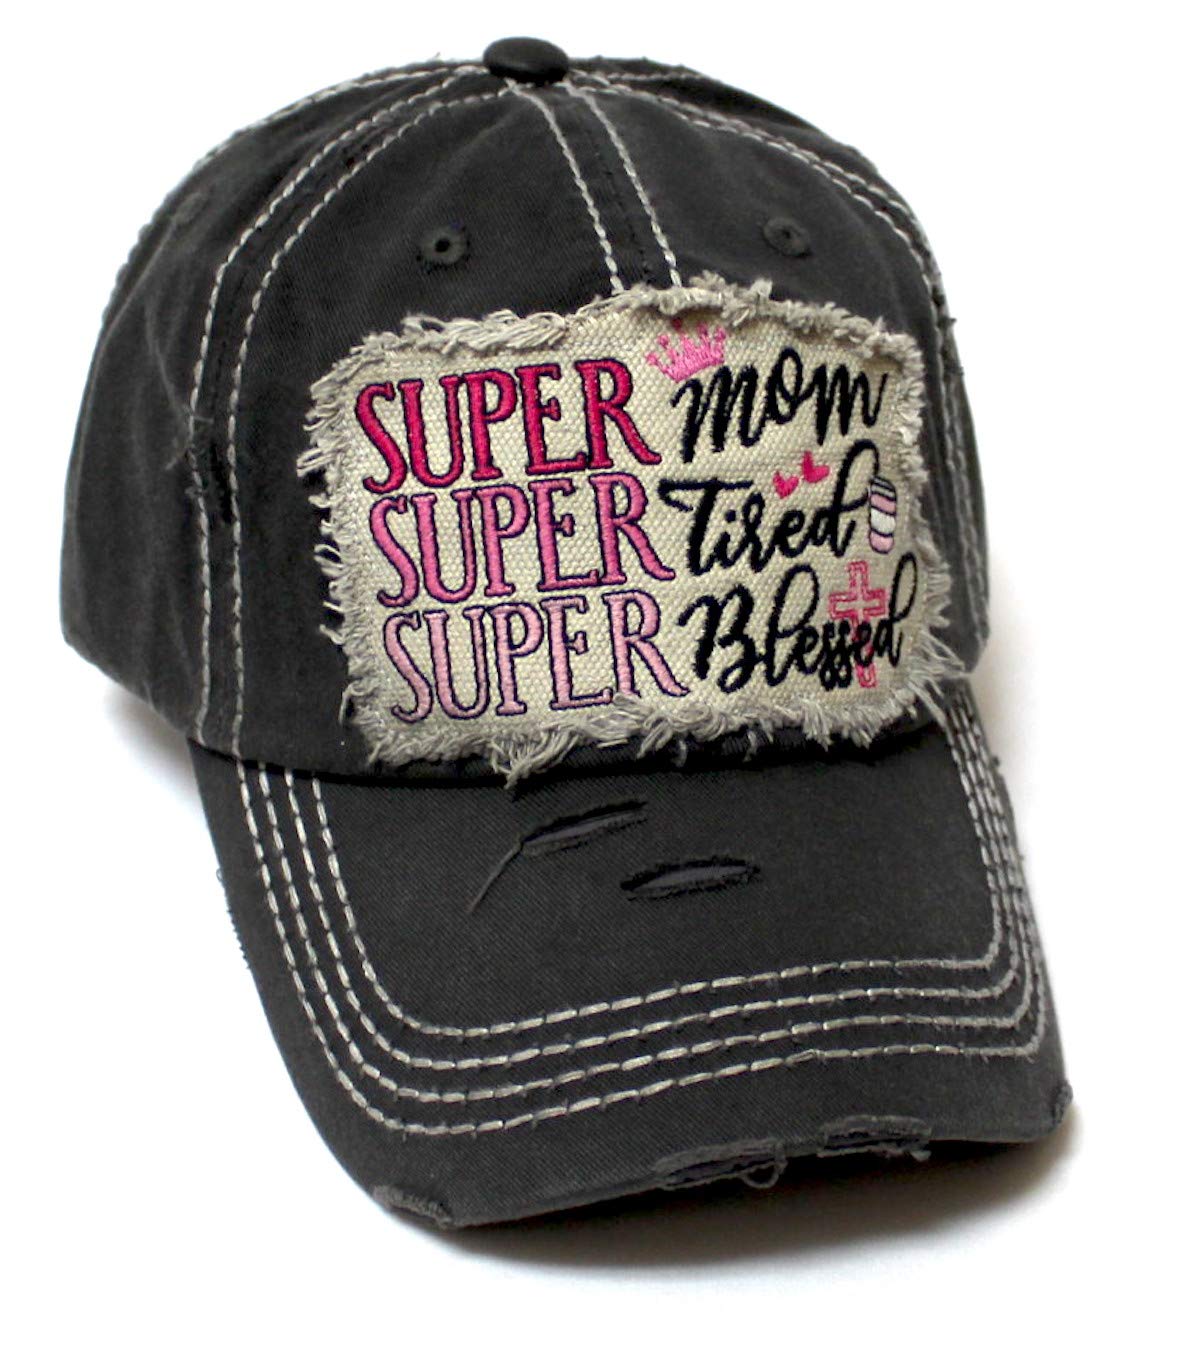 Women's Baseball Cap Super Mom, Super Tired, Super Blessed Patch Embroidery Hat, Vintage Black